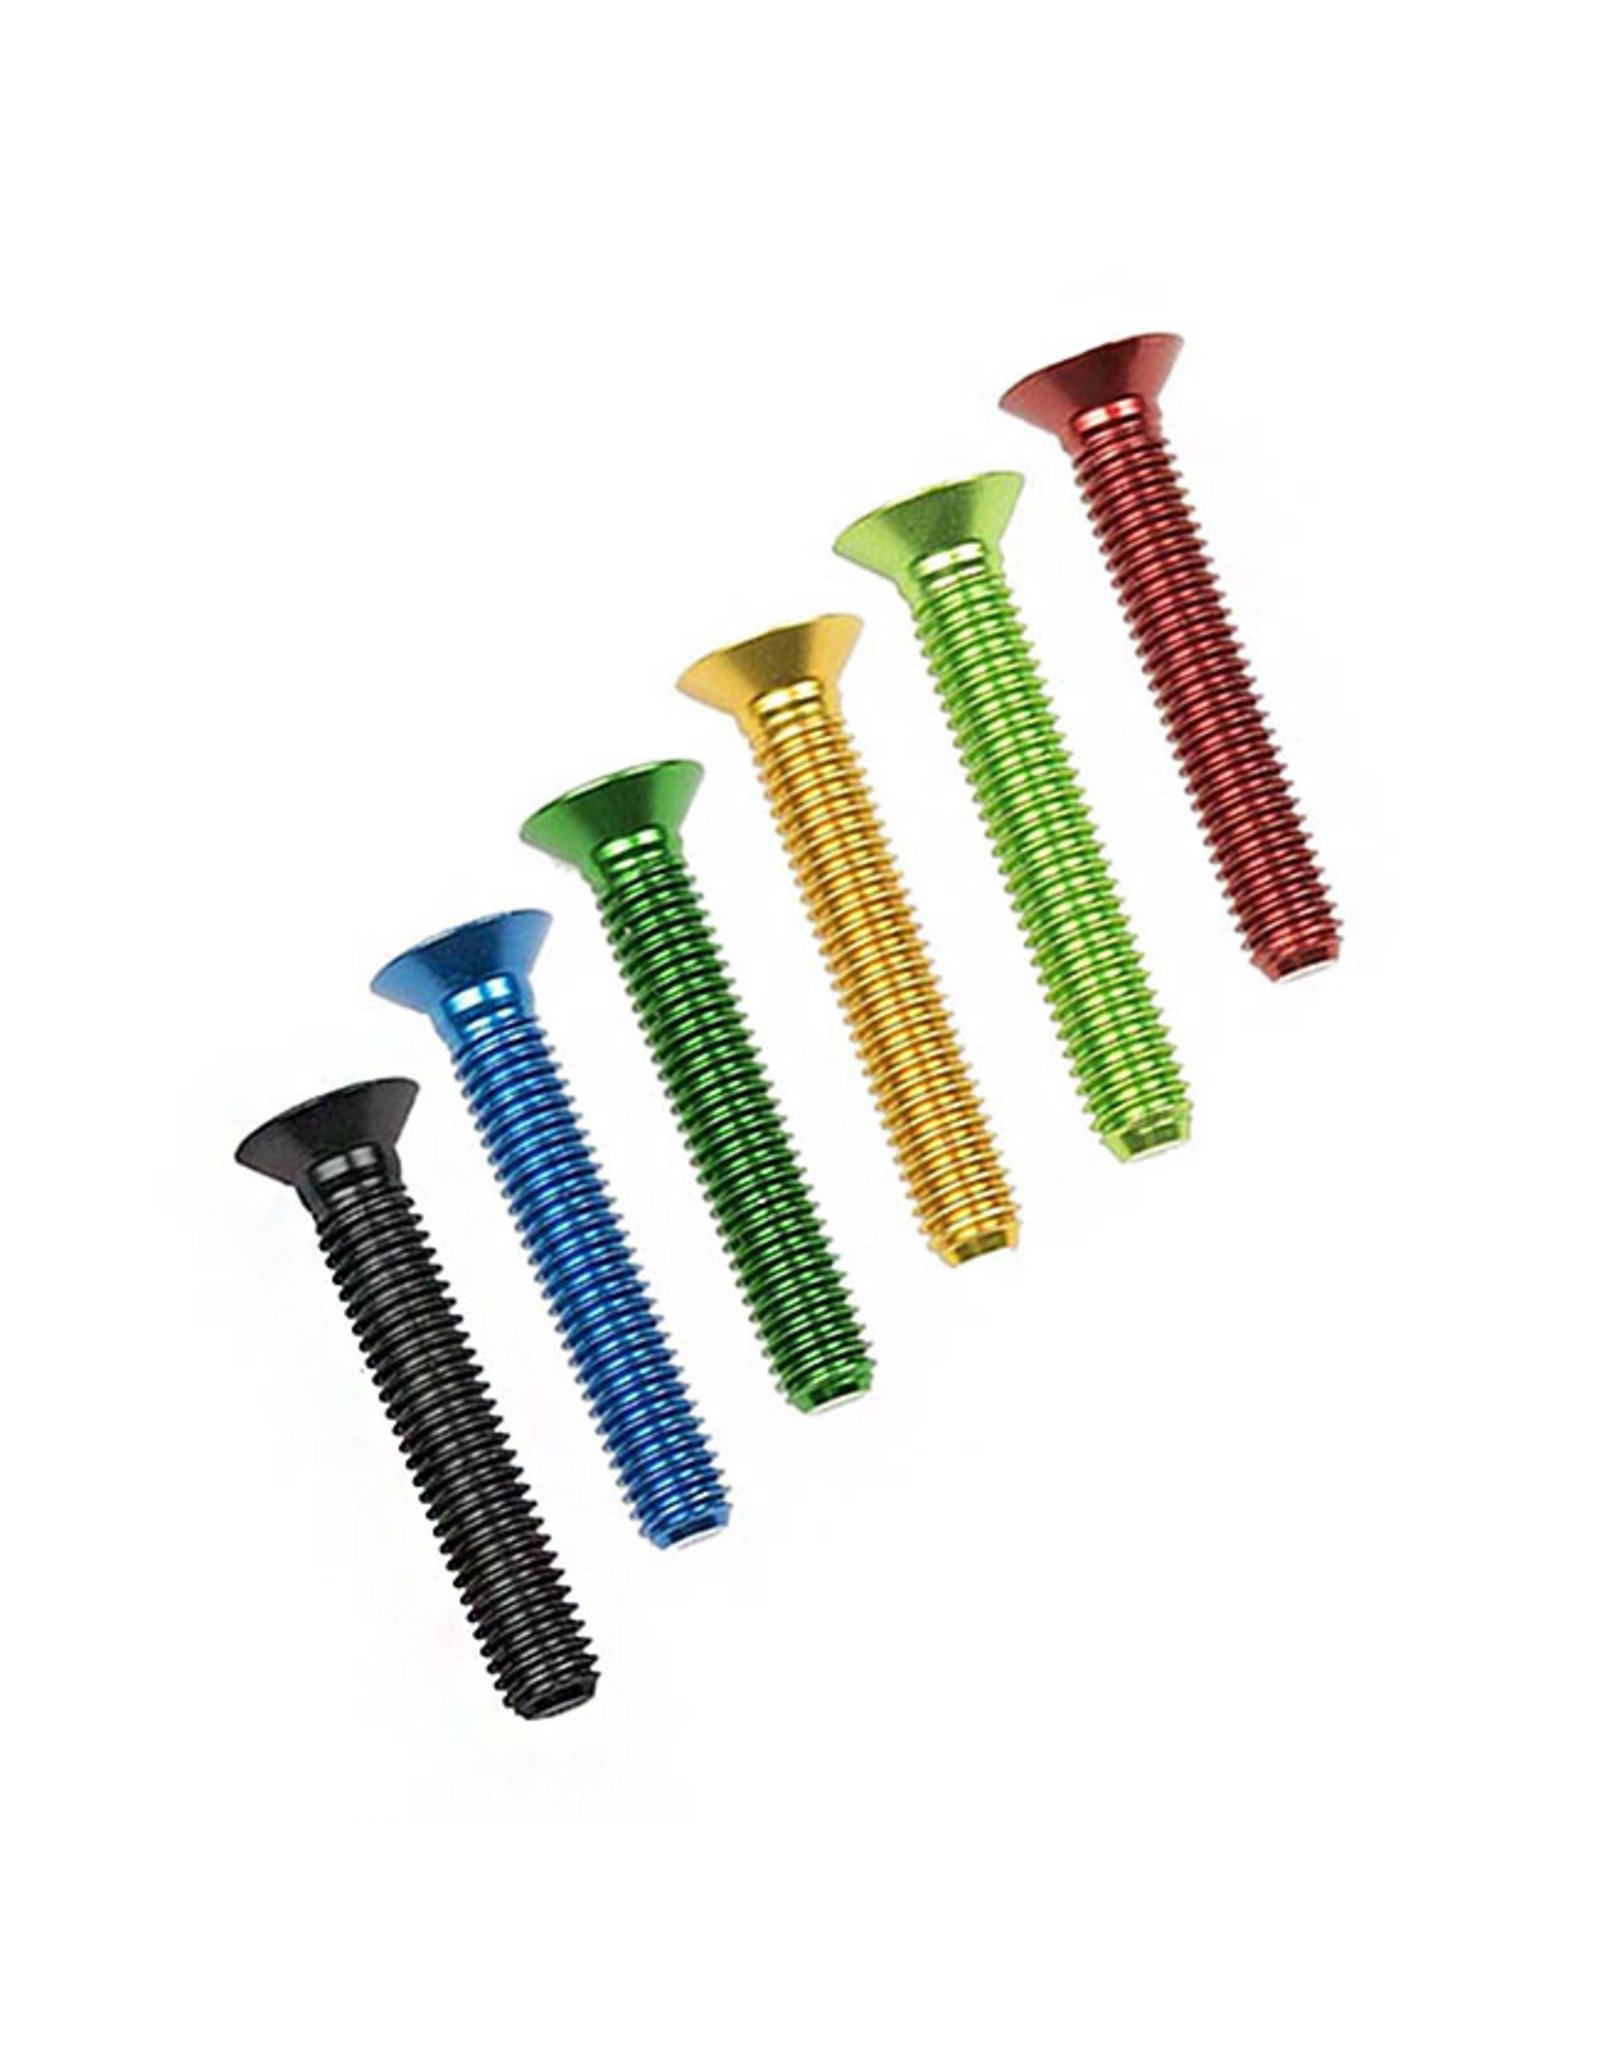 Various Bike Stem Caps With Bolt Gift for Cyclists, Present for